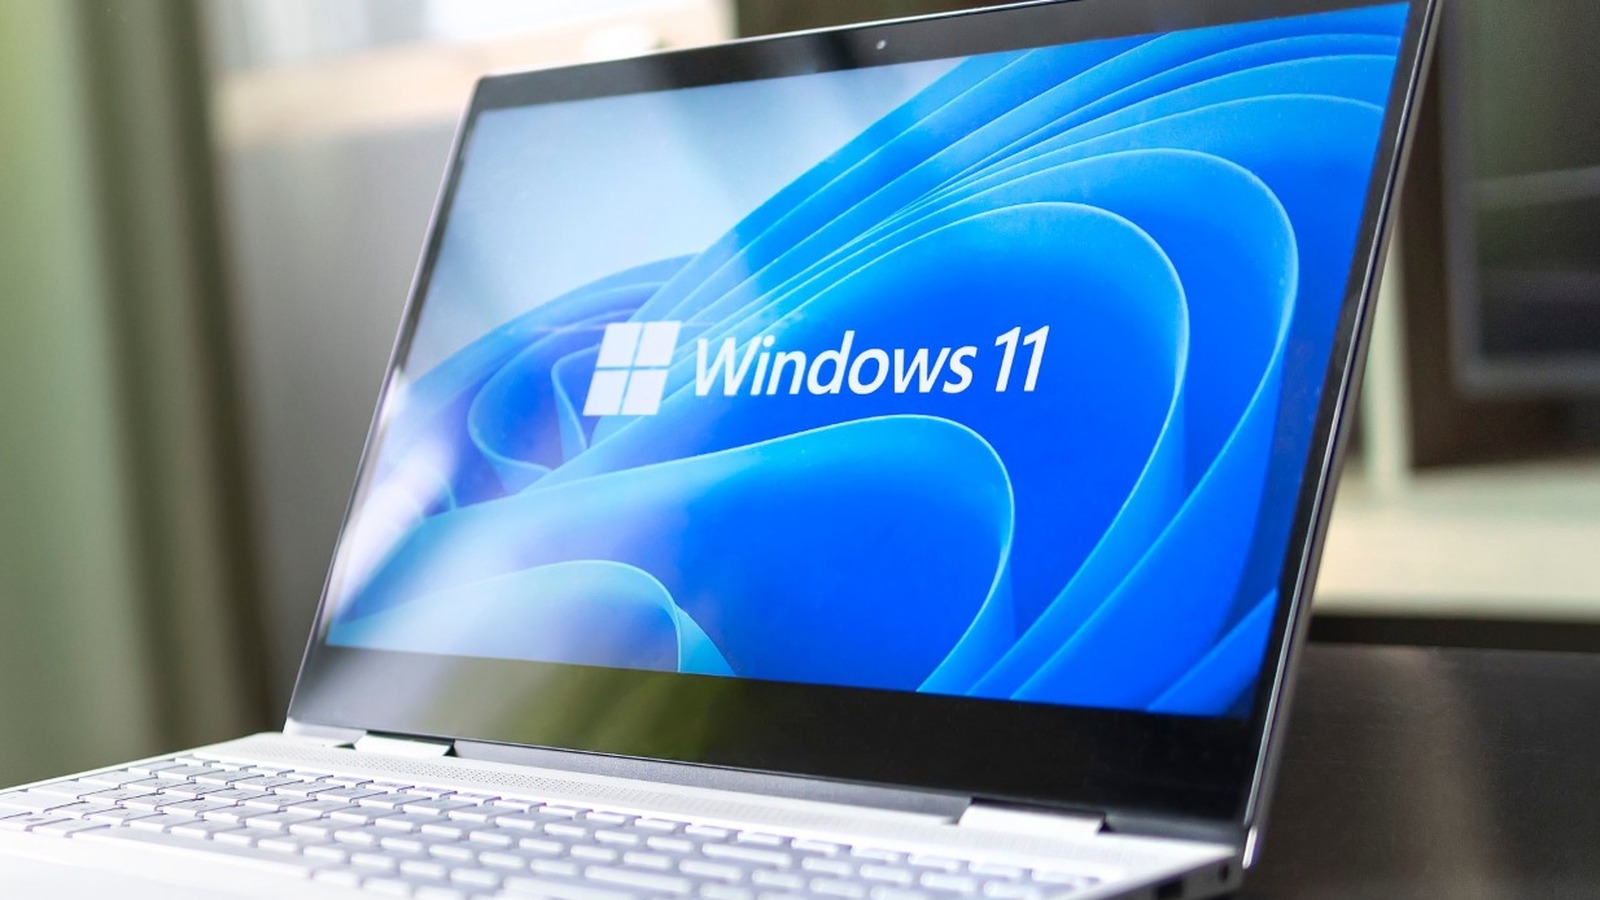 How to check if your PC can run Windows 11